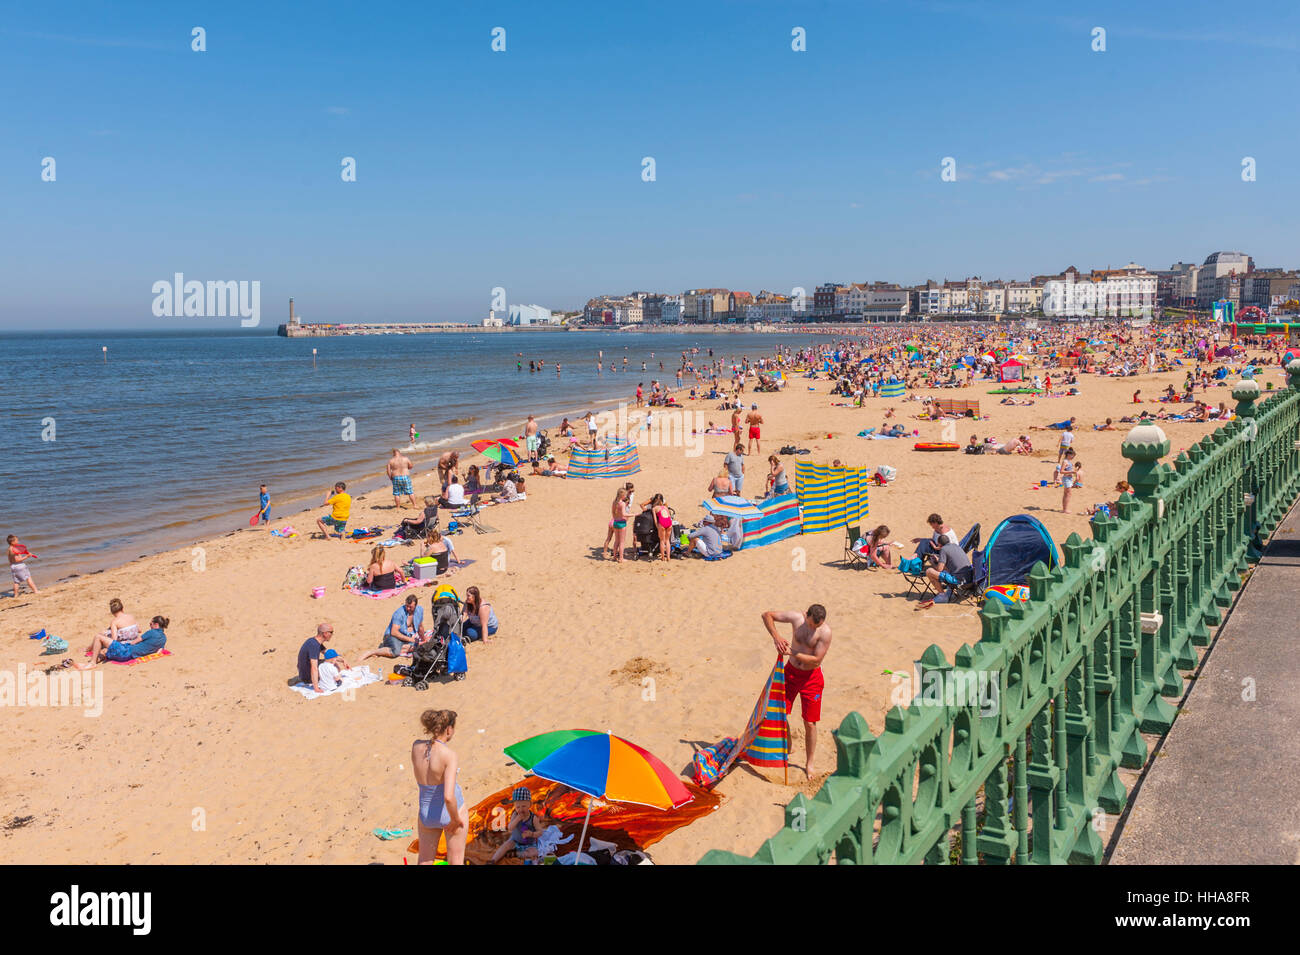 THe beach at margate on a busy summer day. with crowds. Stock Photo